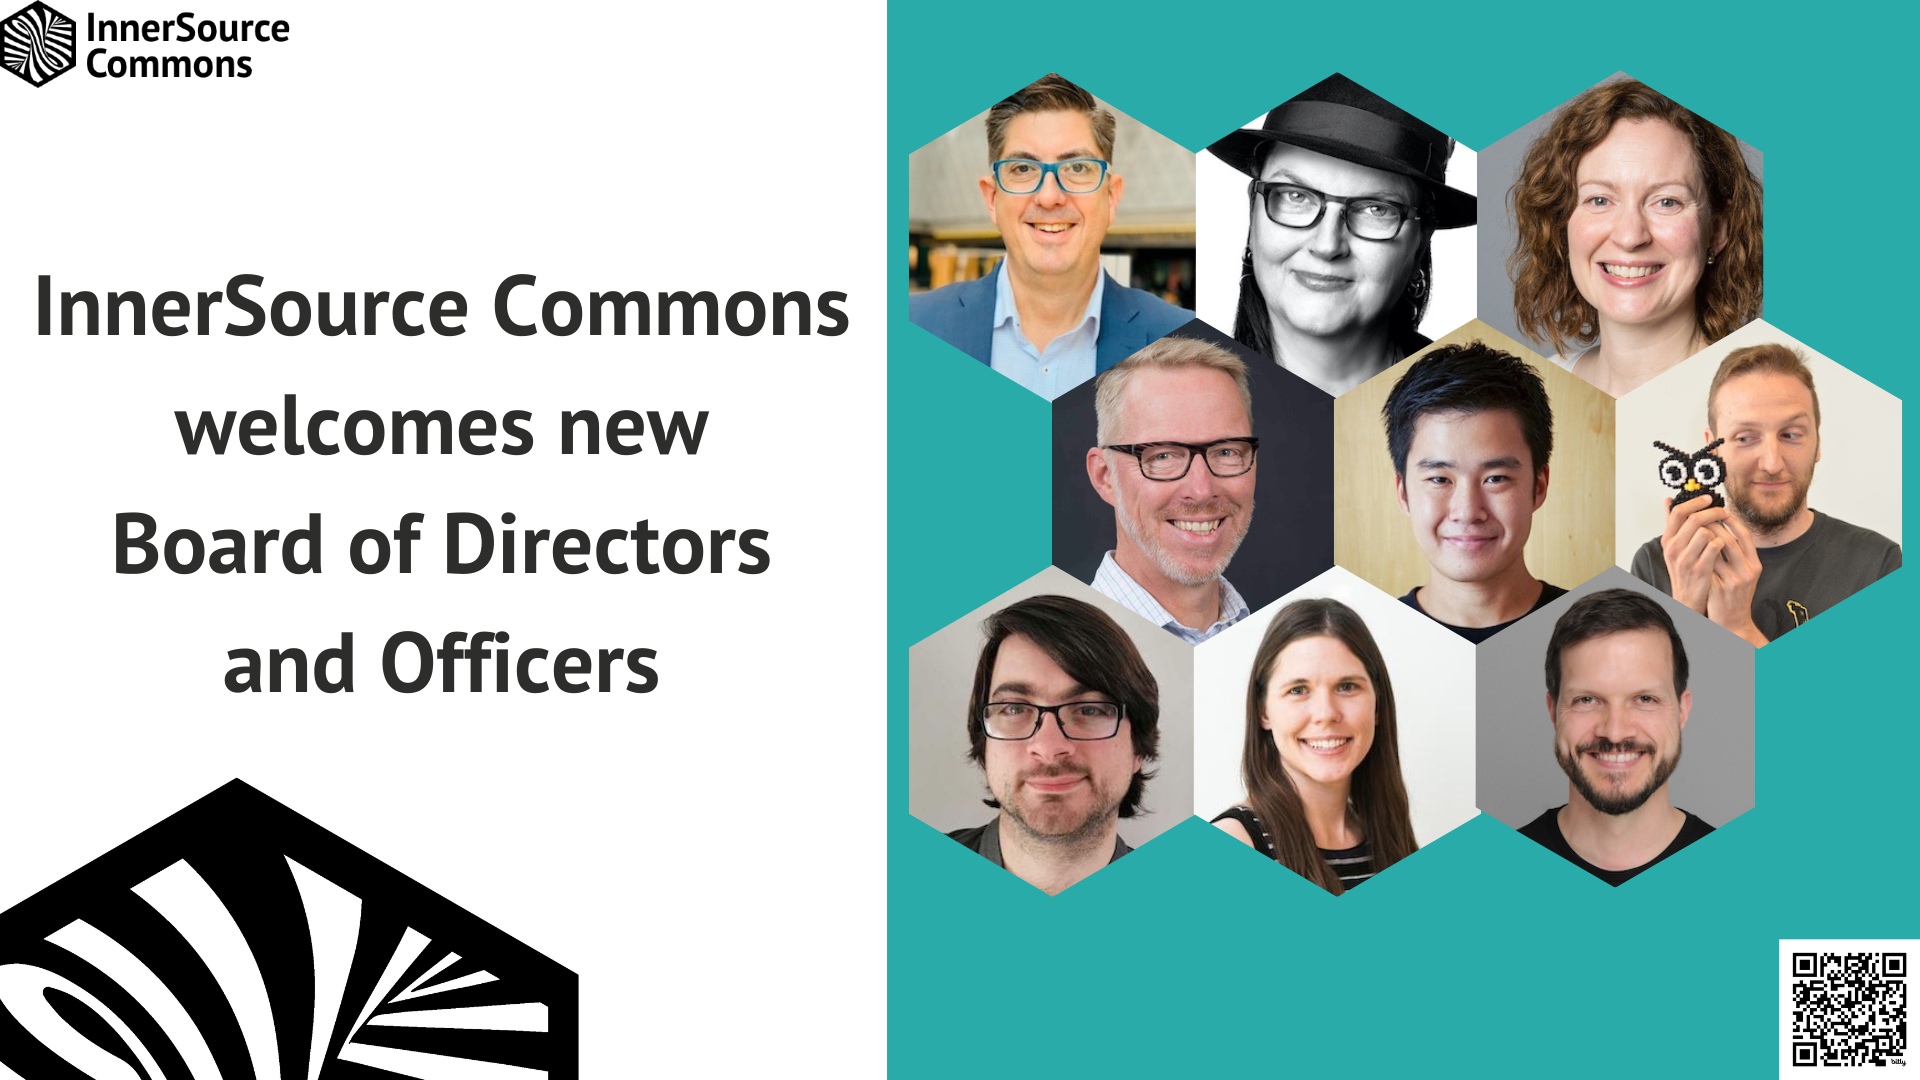 InnerSource Commons welcomes our new Board and Officers